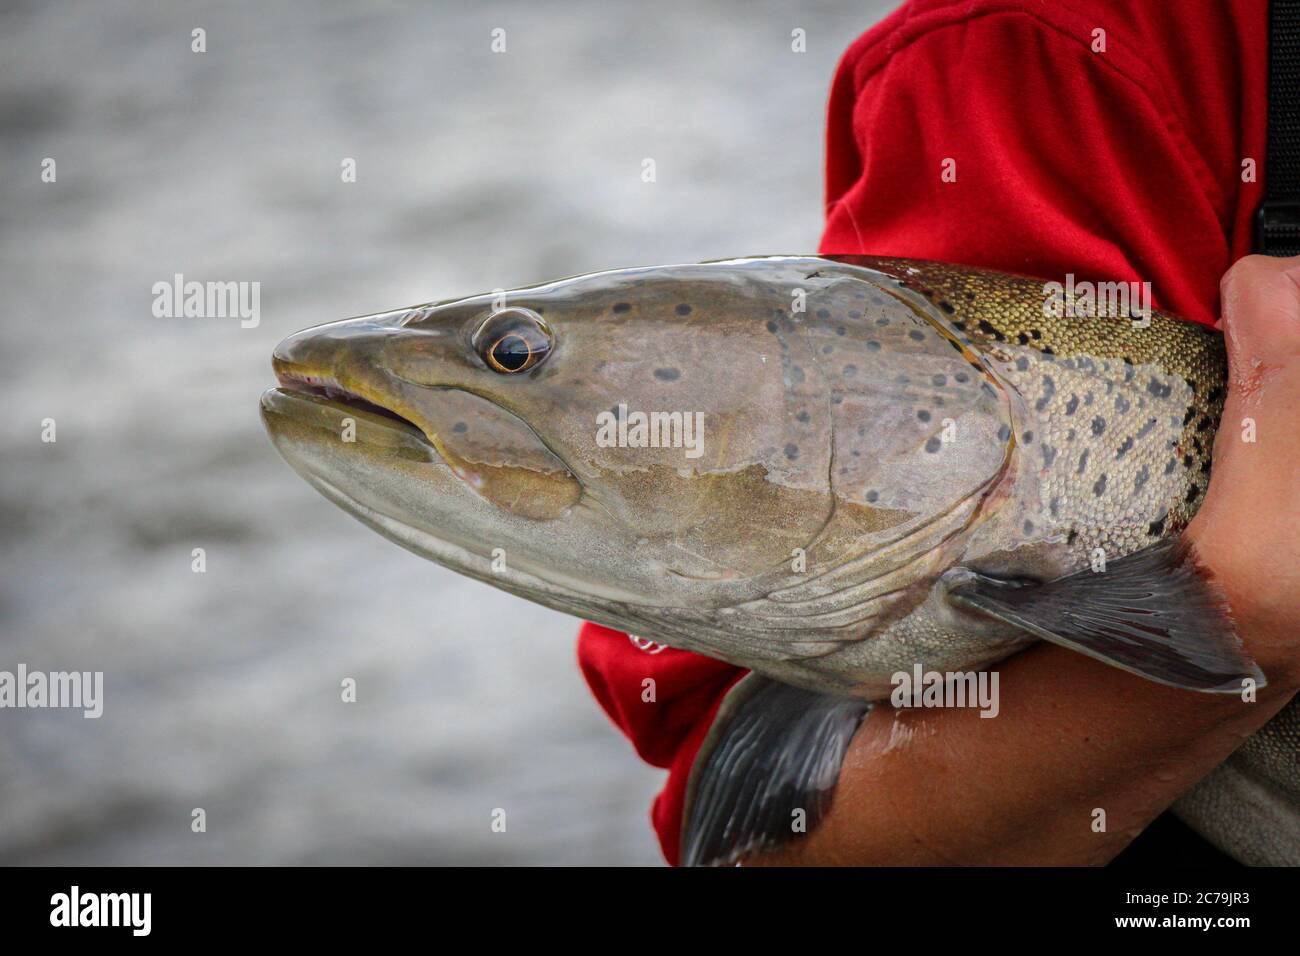 A close up of the head of a Taimen fish, the largest salmonid species in the world. Stock Photo